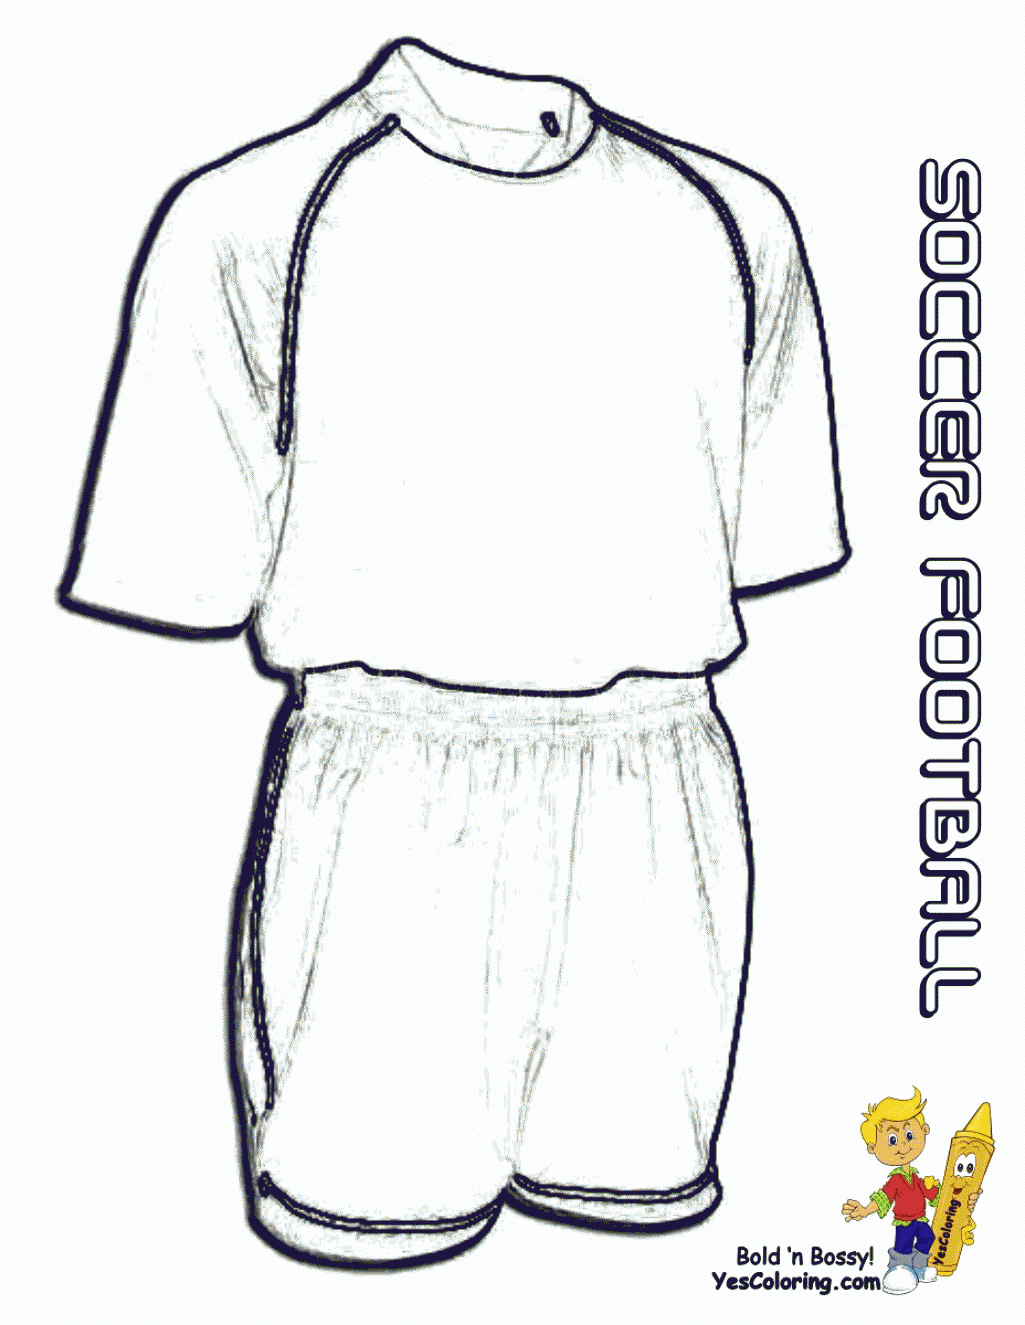 Football Jersey Coloring Page Wwwwalzem Sports Jersey Coloring ...